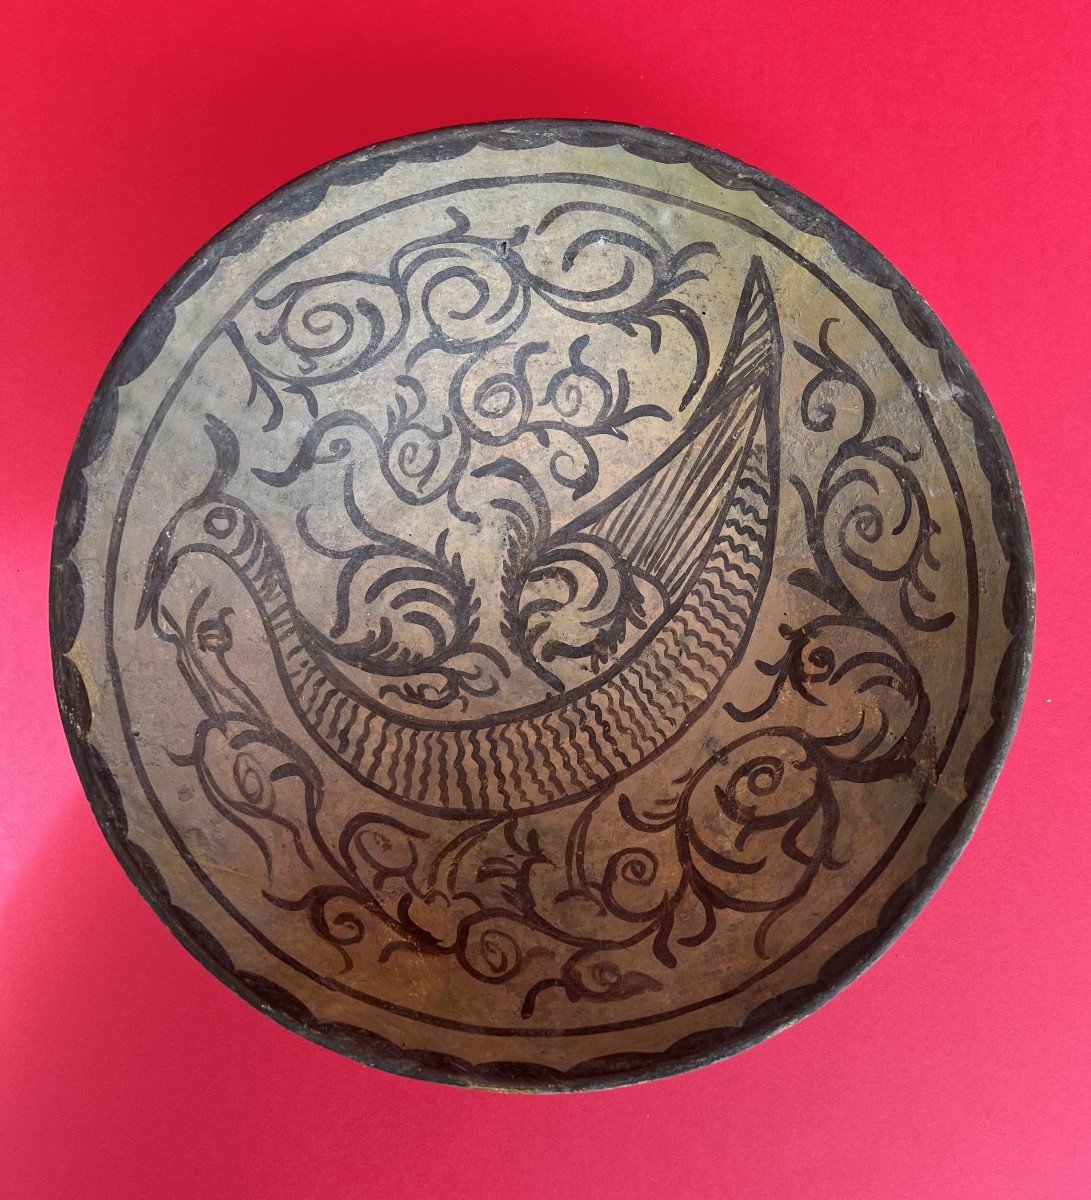 Iran Nishapur X Th Combed Ceramic Cup With Bird Decoration In The Center.